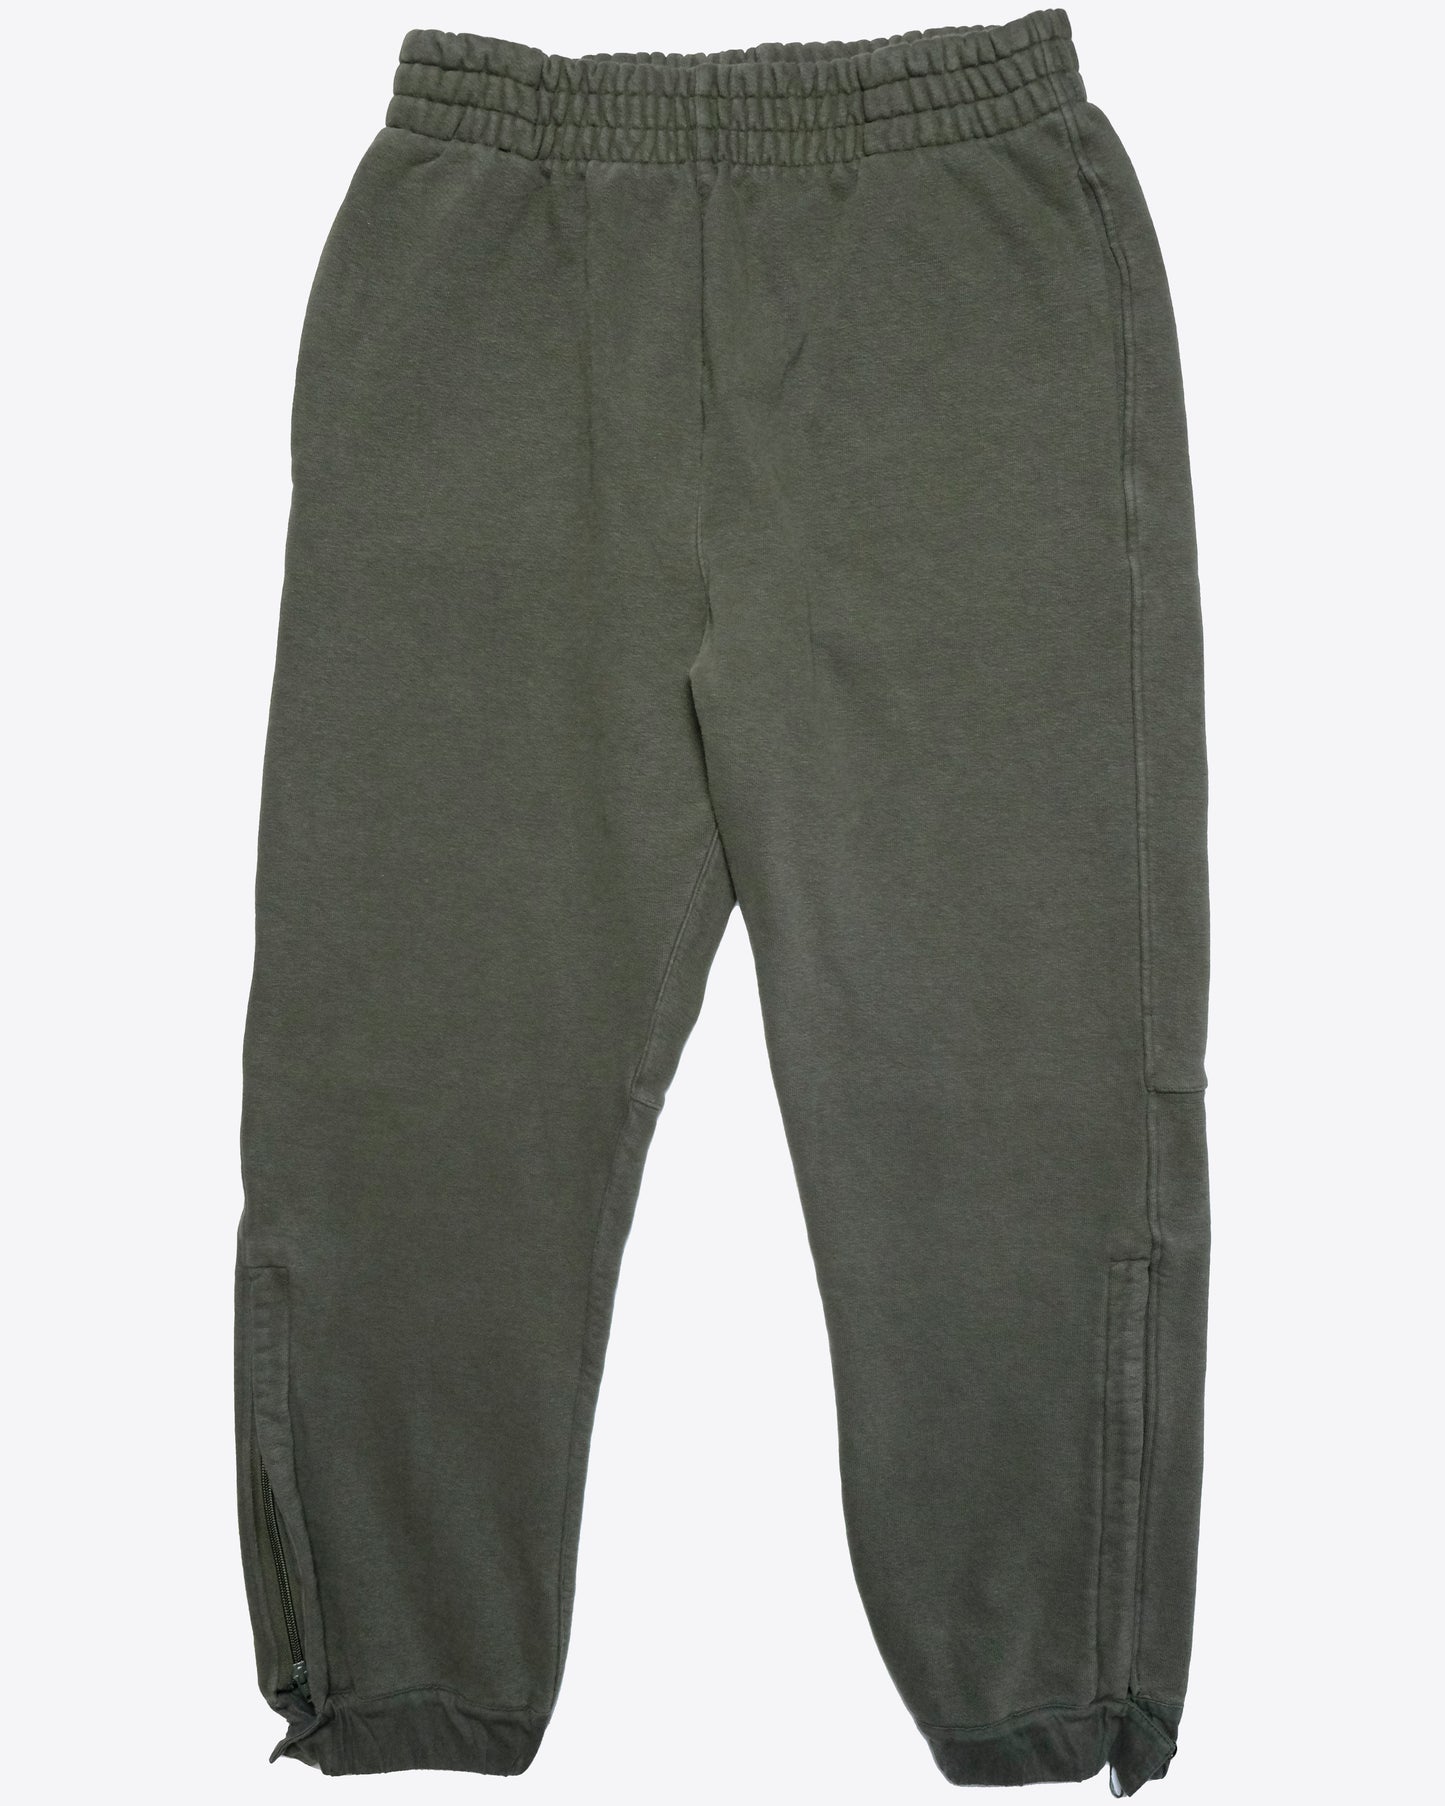 Yeezy Season - 1 Sweatpants in Olive, Size L – Archaic Archive